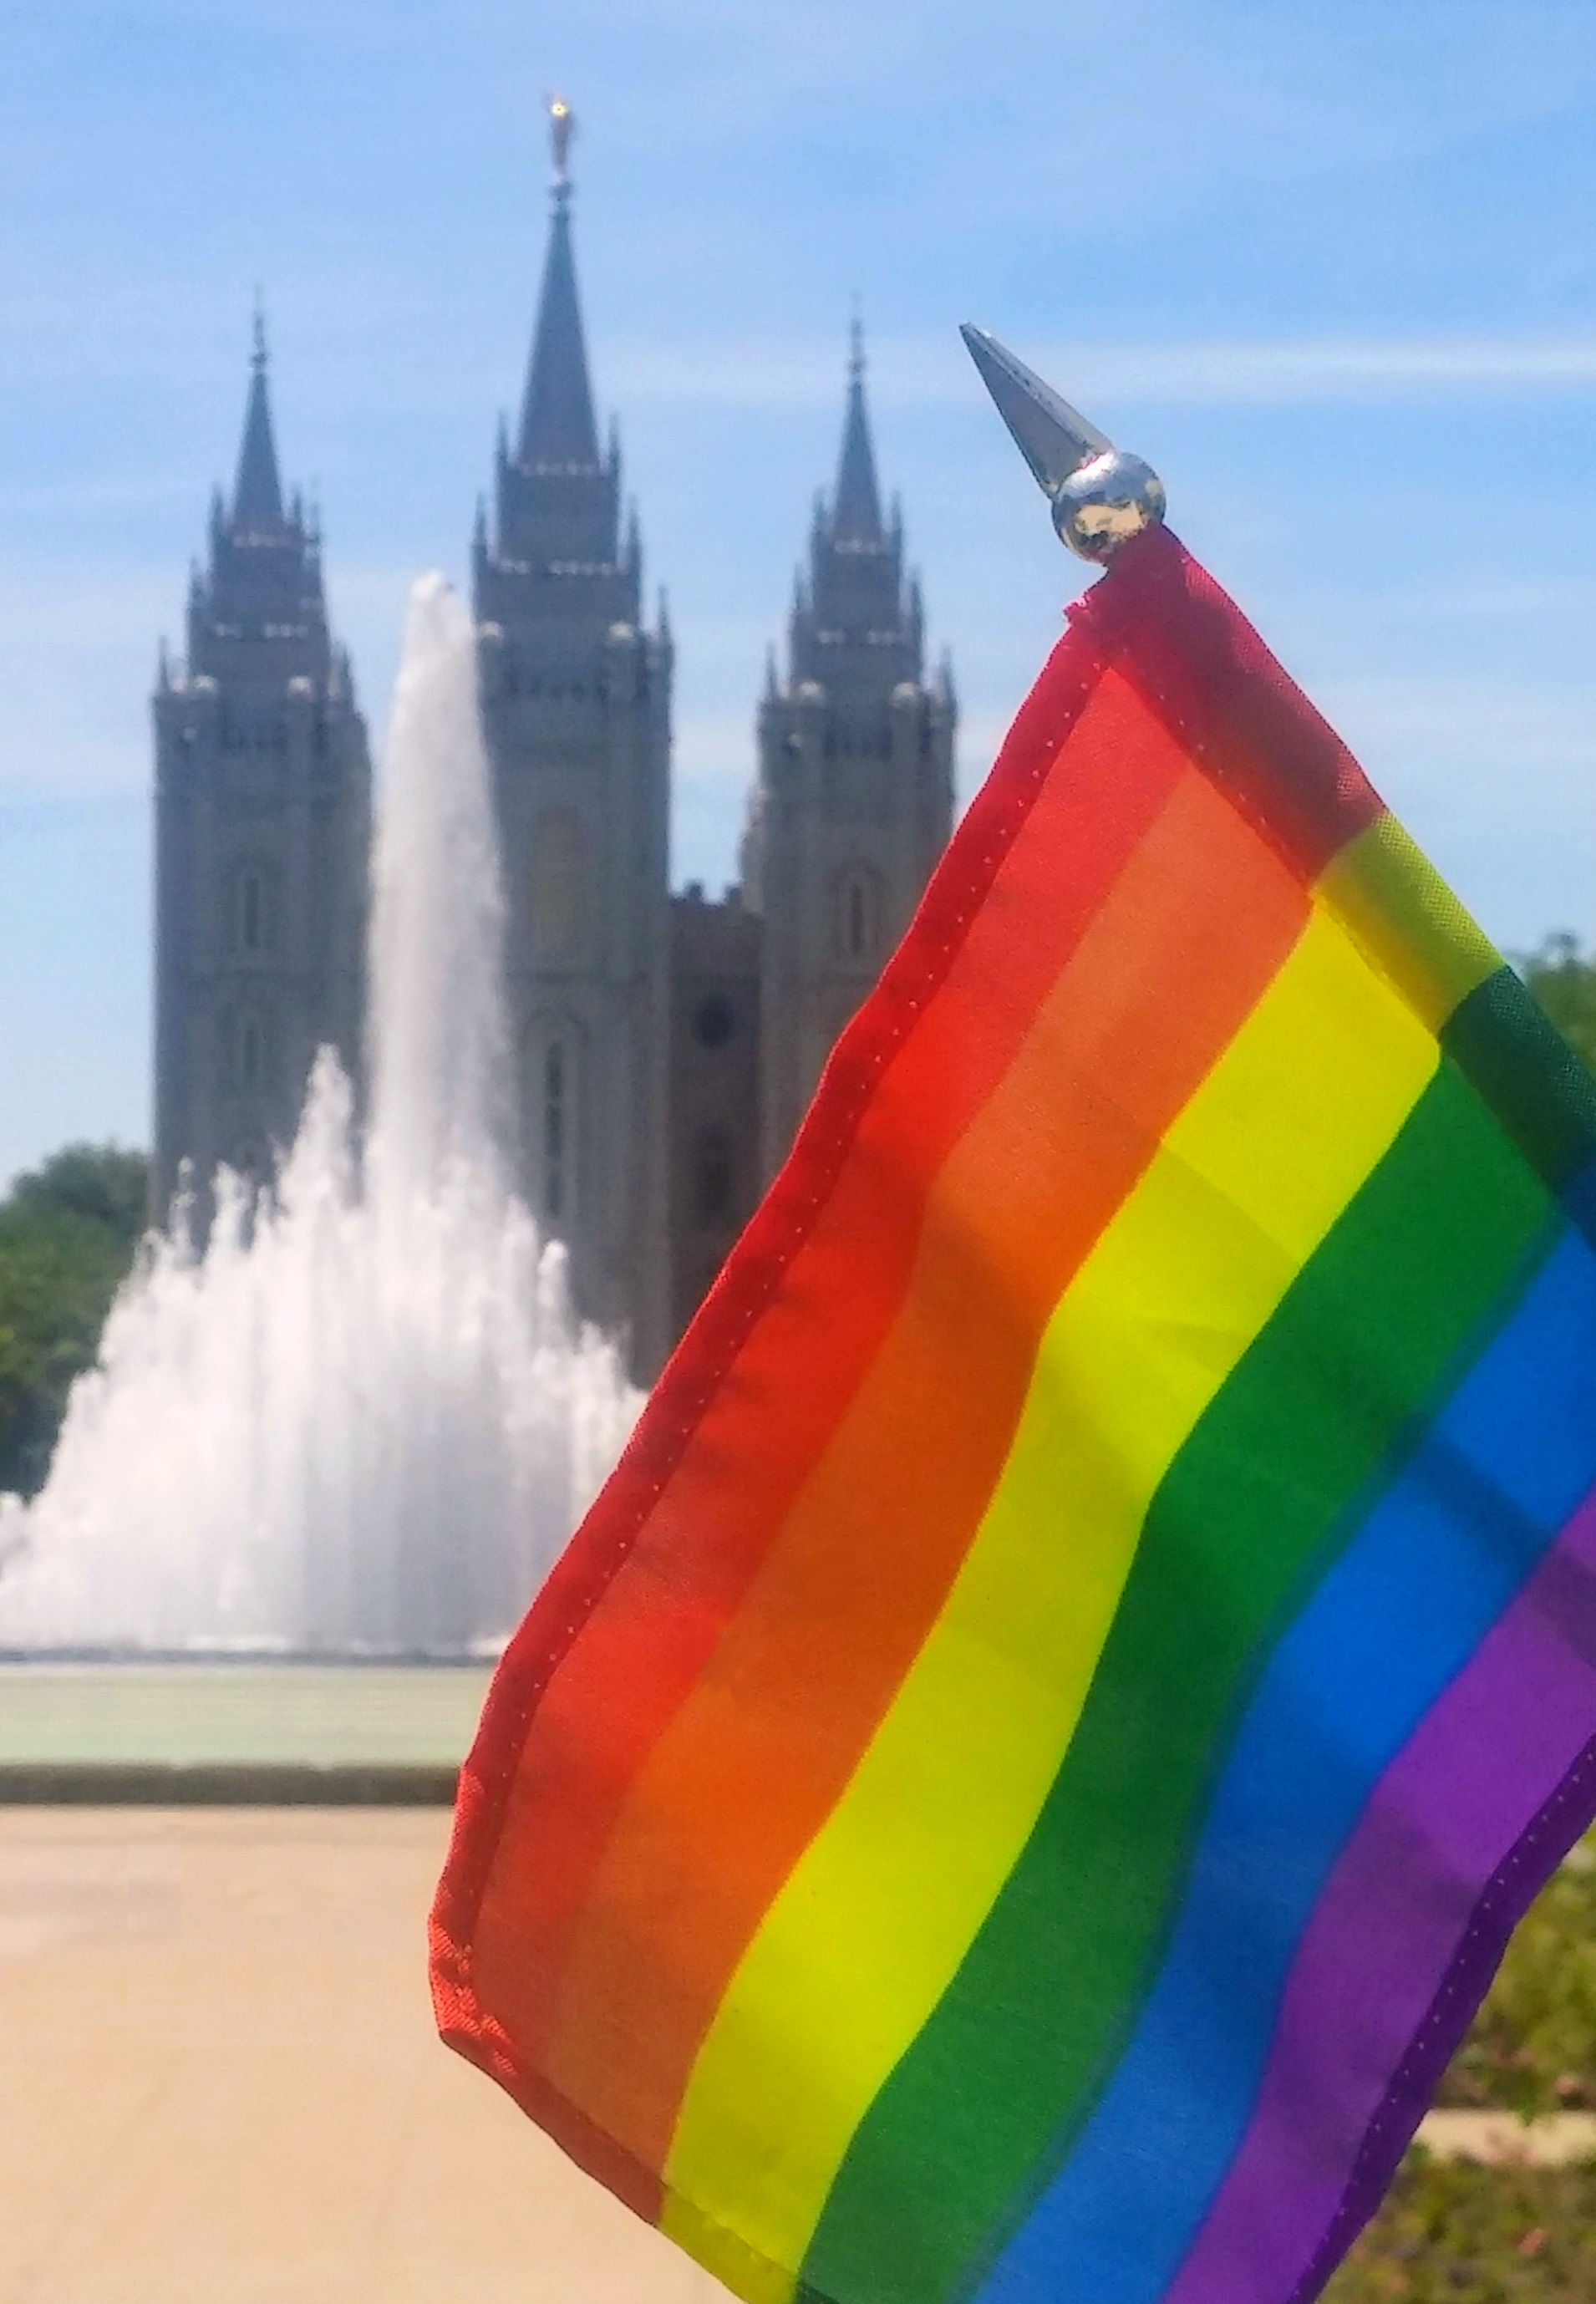 the church does not allow any sexual expression for lesbian and gay individuals